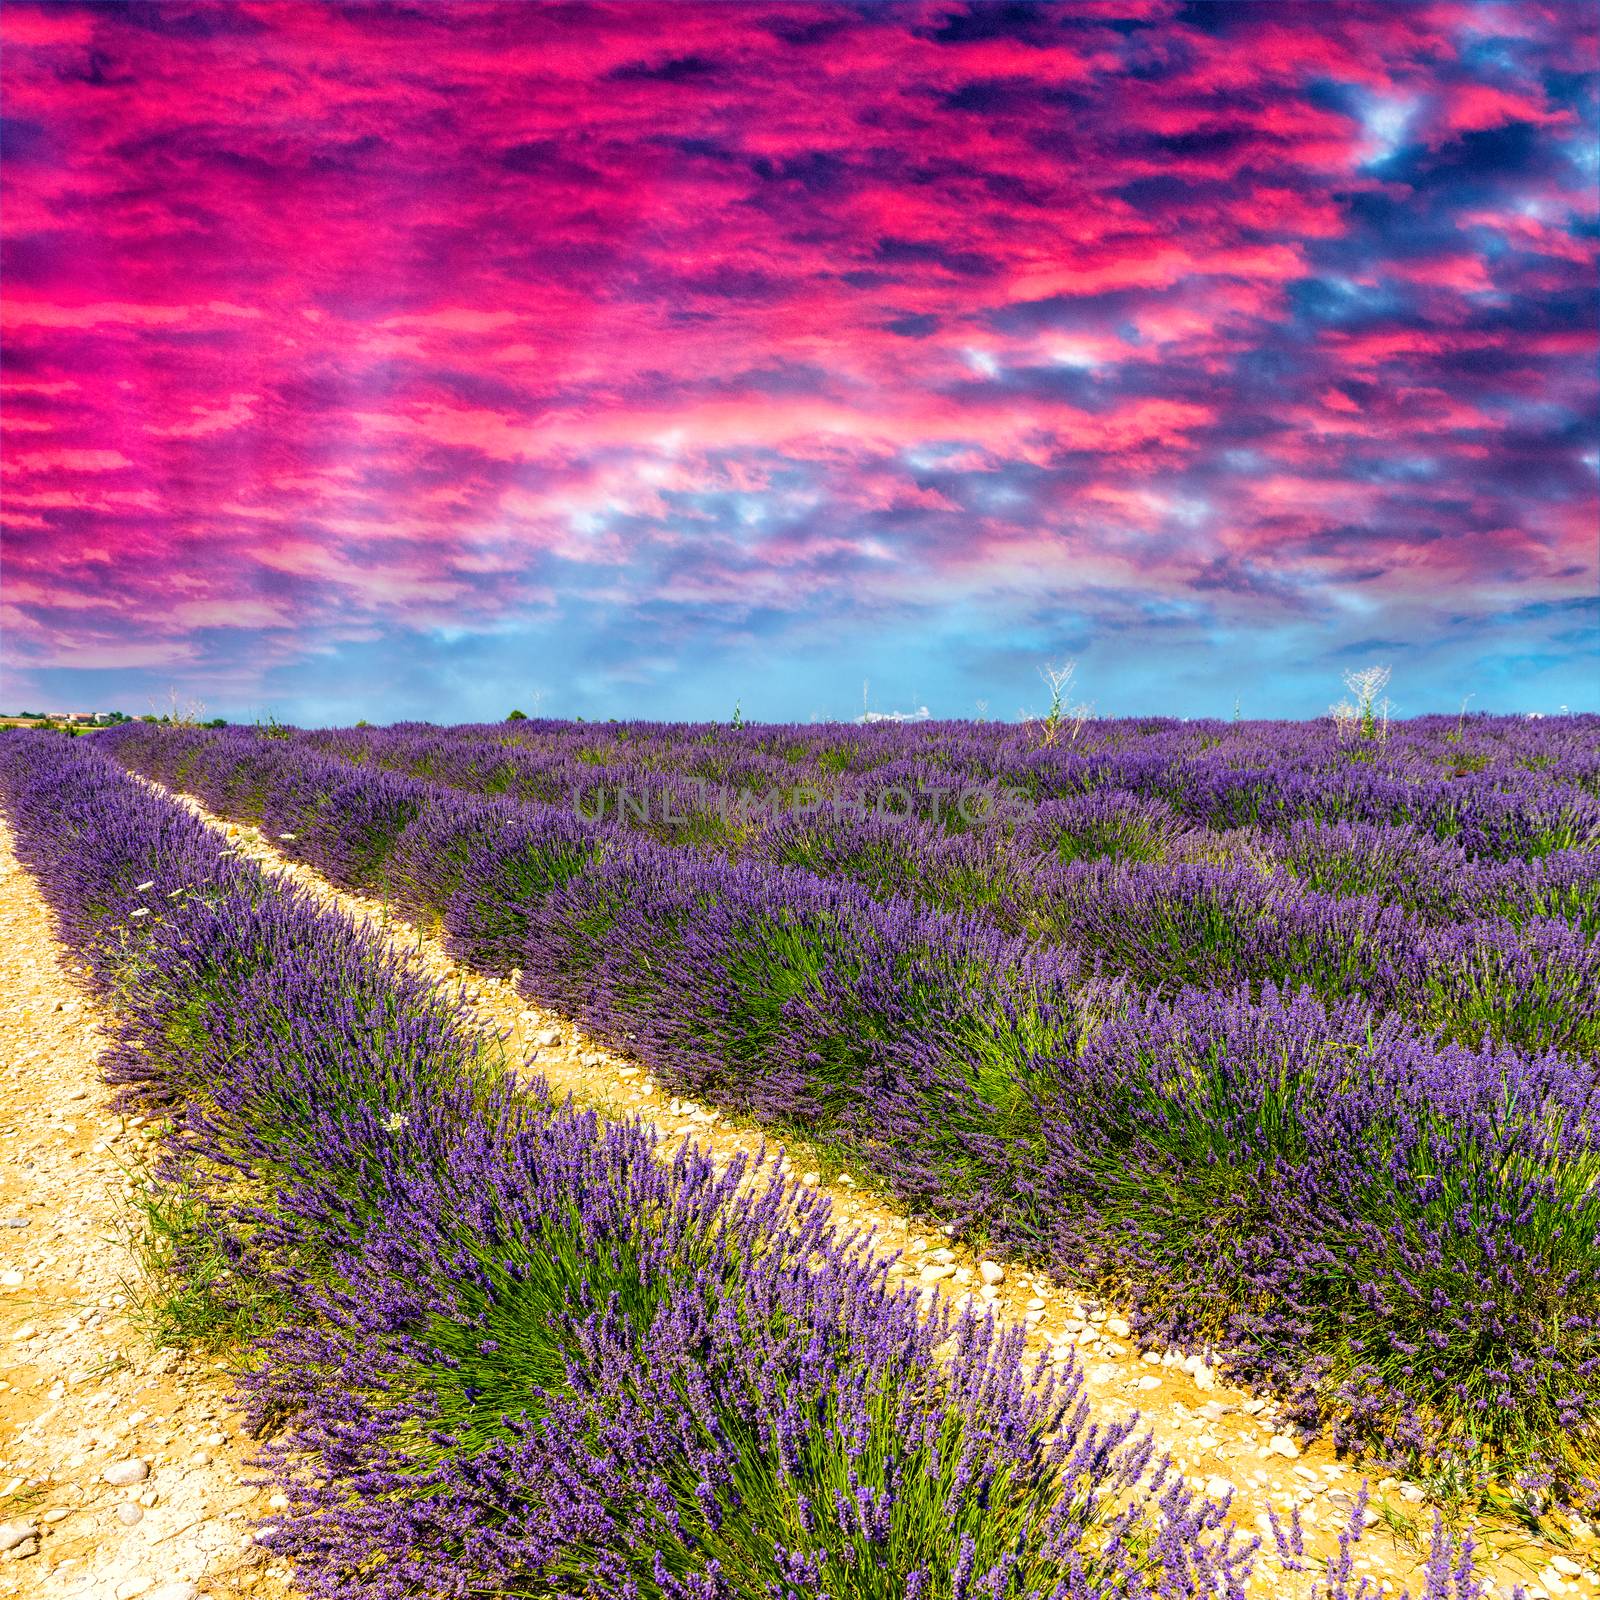 Lavender flower blooming scented fields in endless rows. Valensole plateau, provence - France